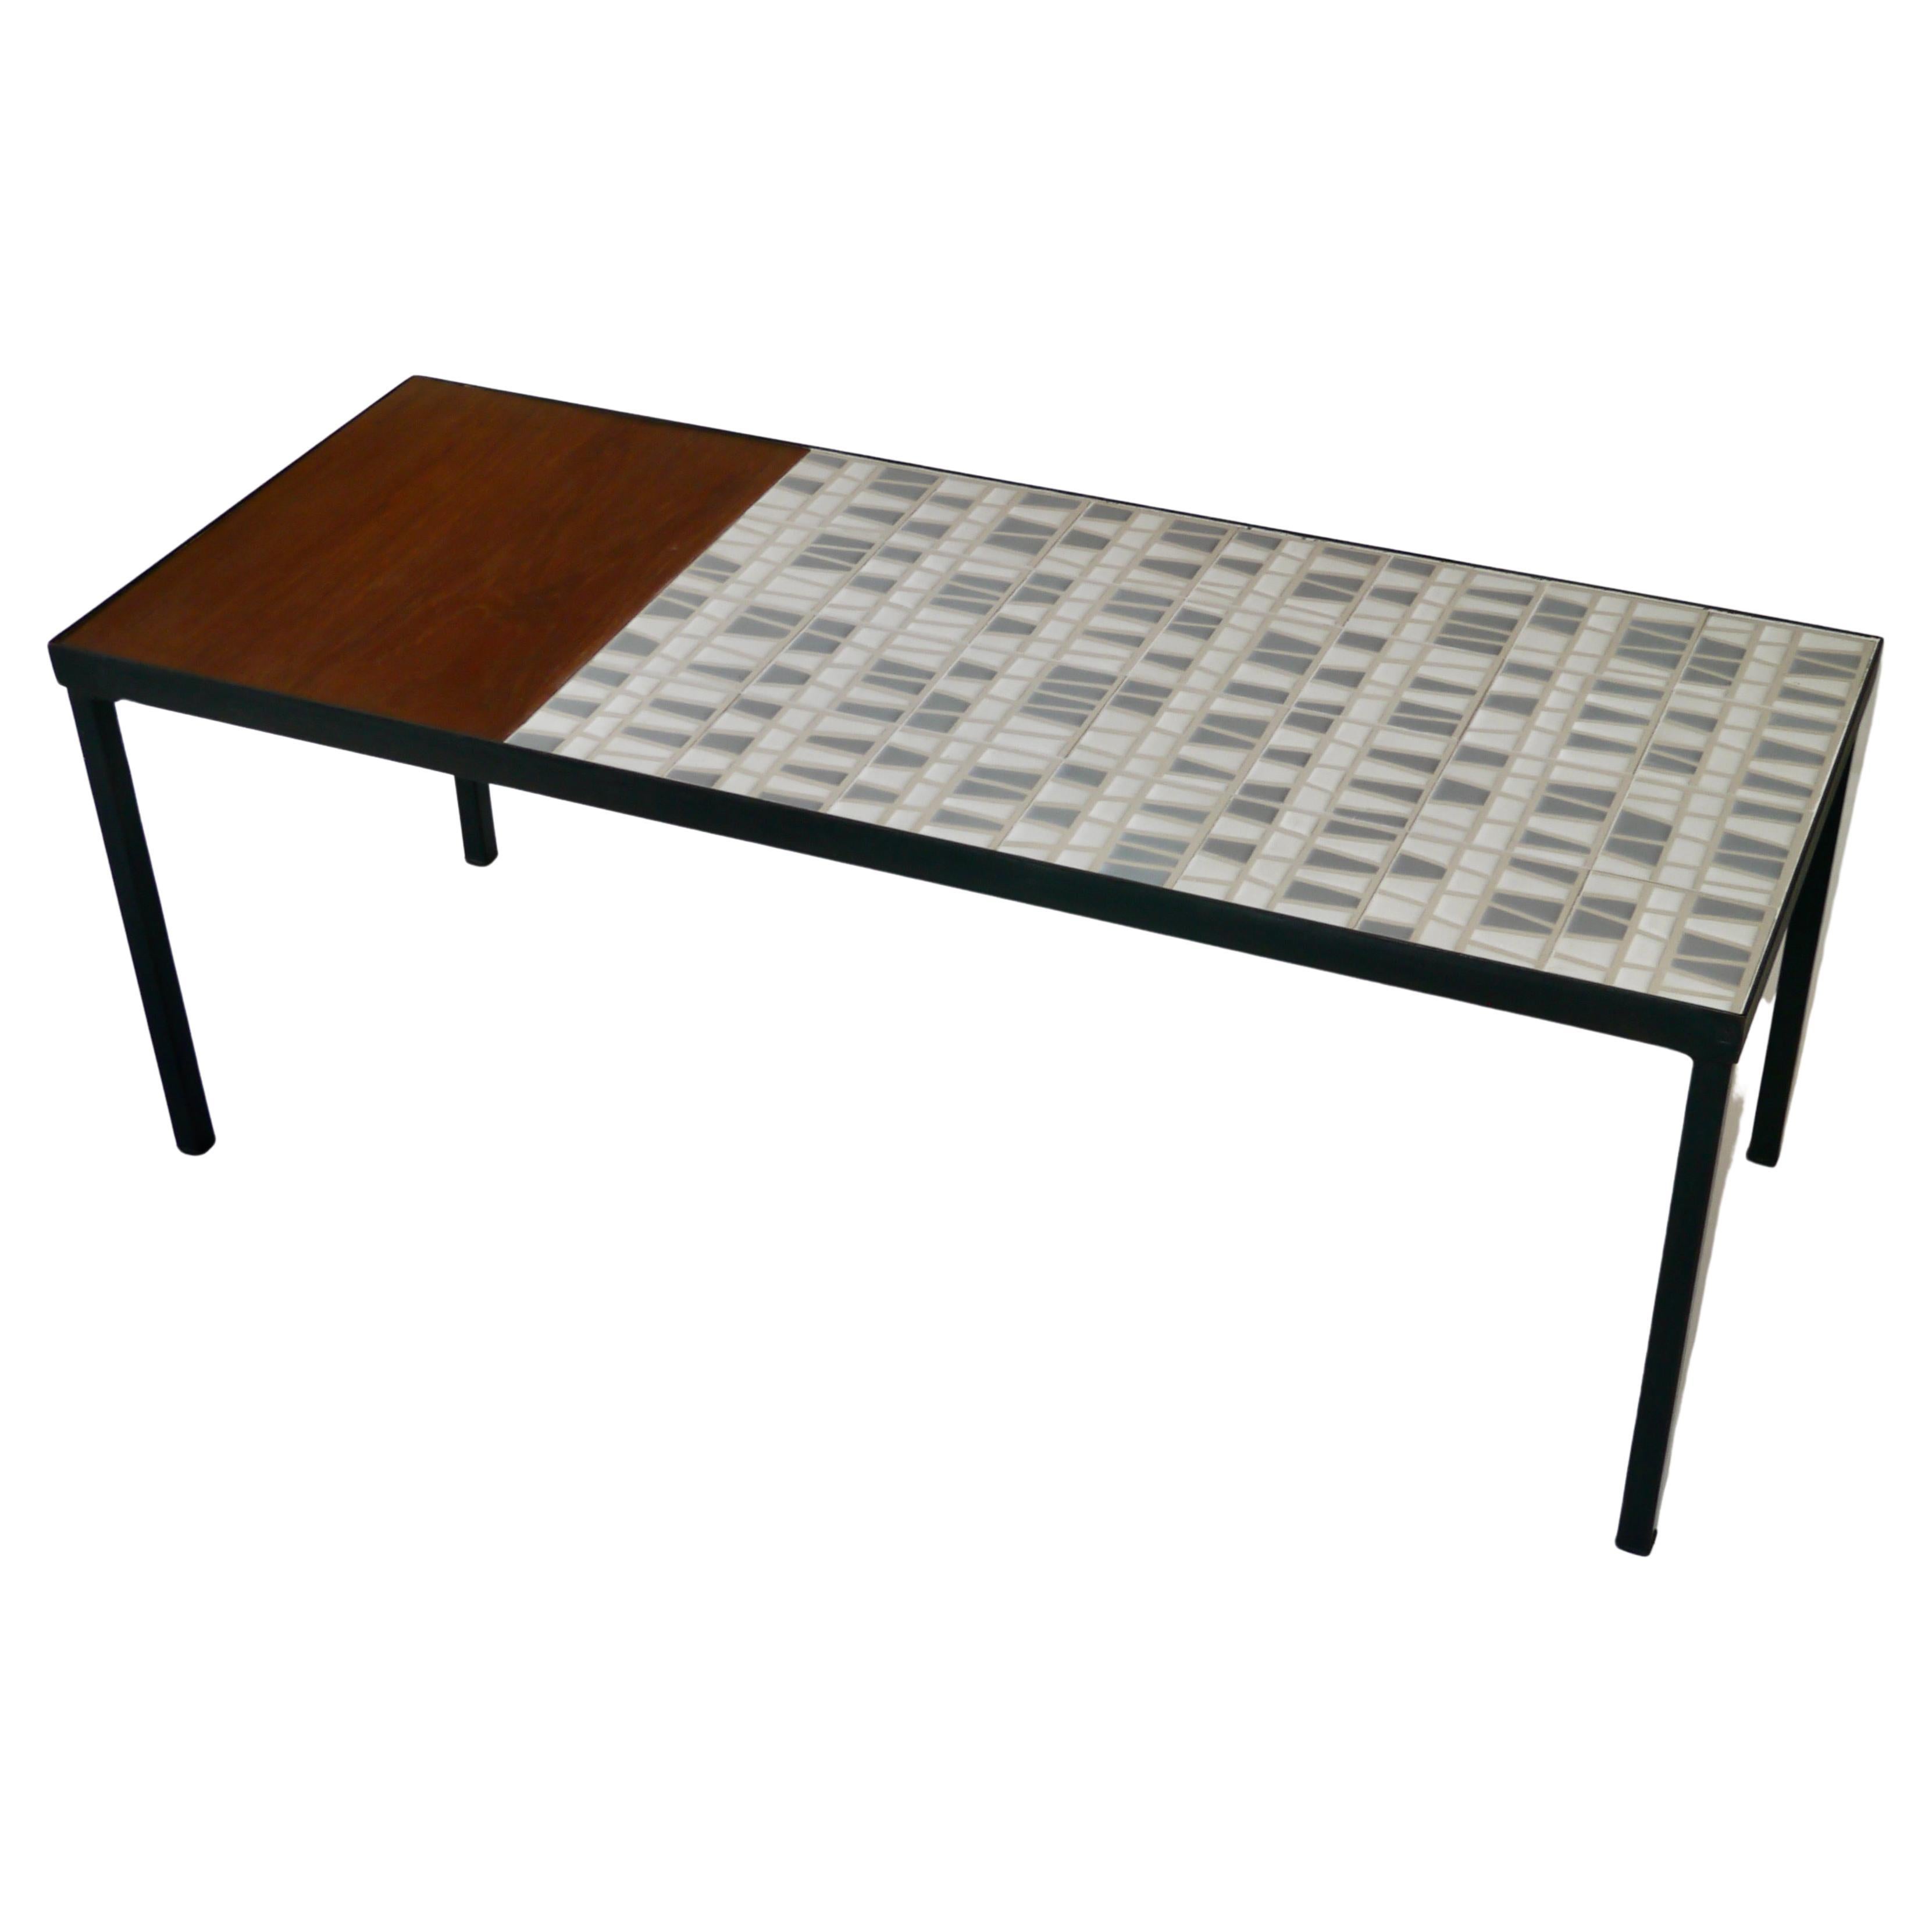 Teak & Ceramic Coffee Table by Roger Capron, France, c. 1960 For Sale